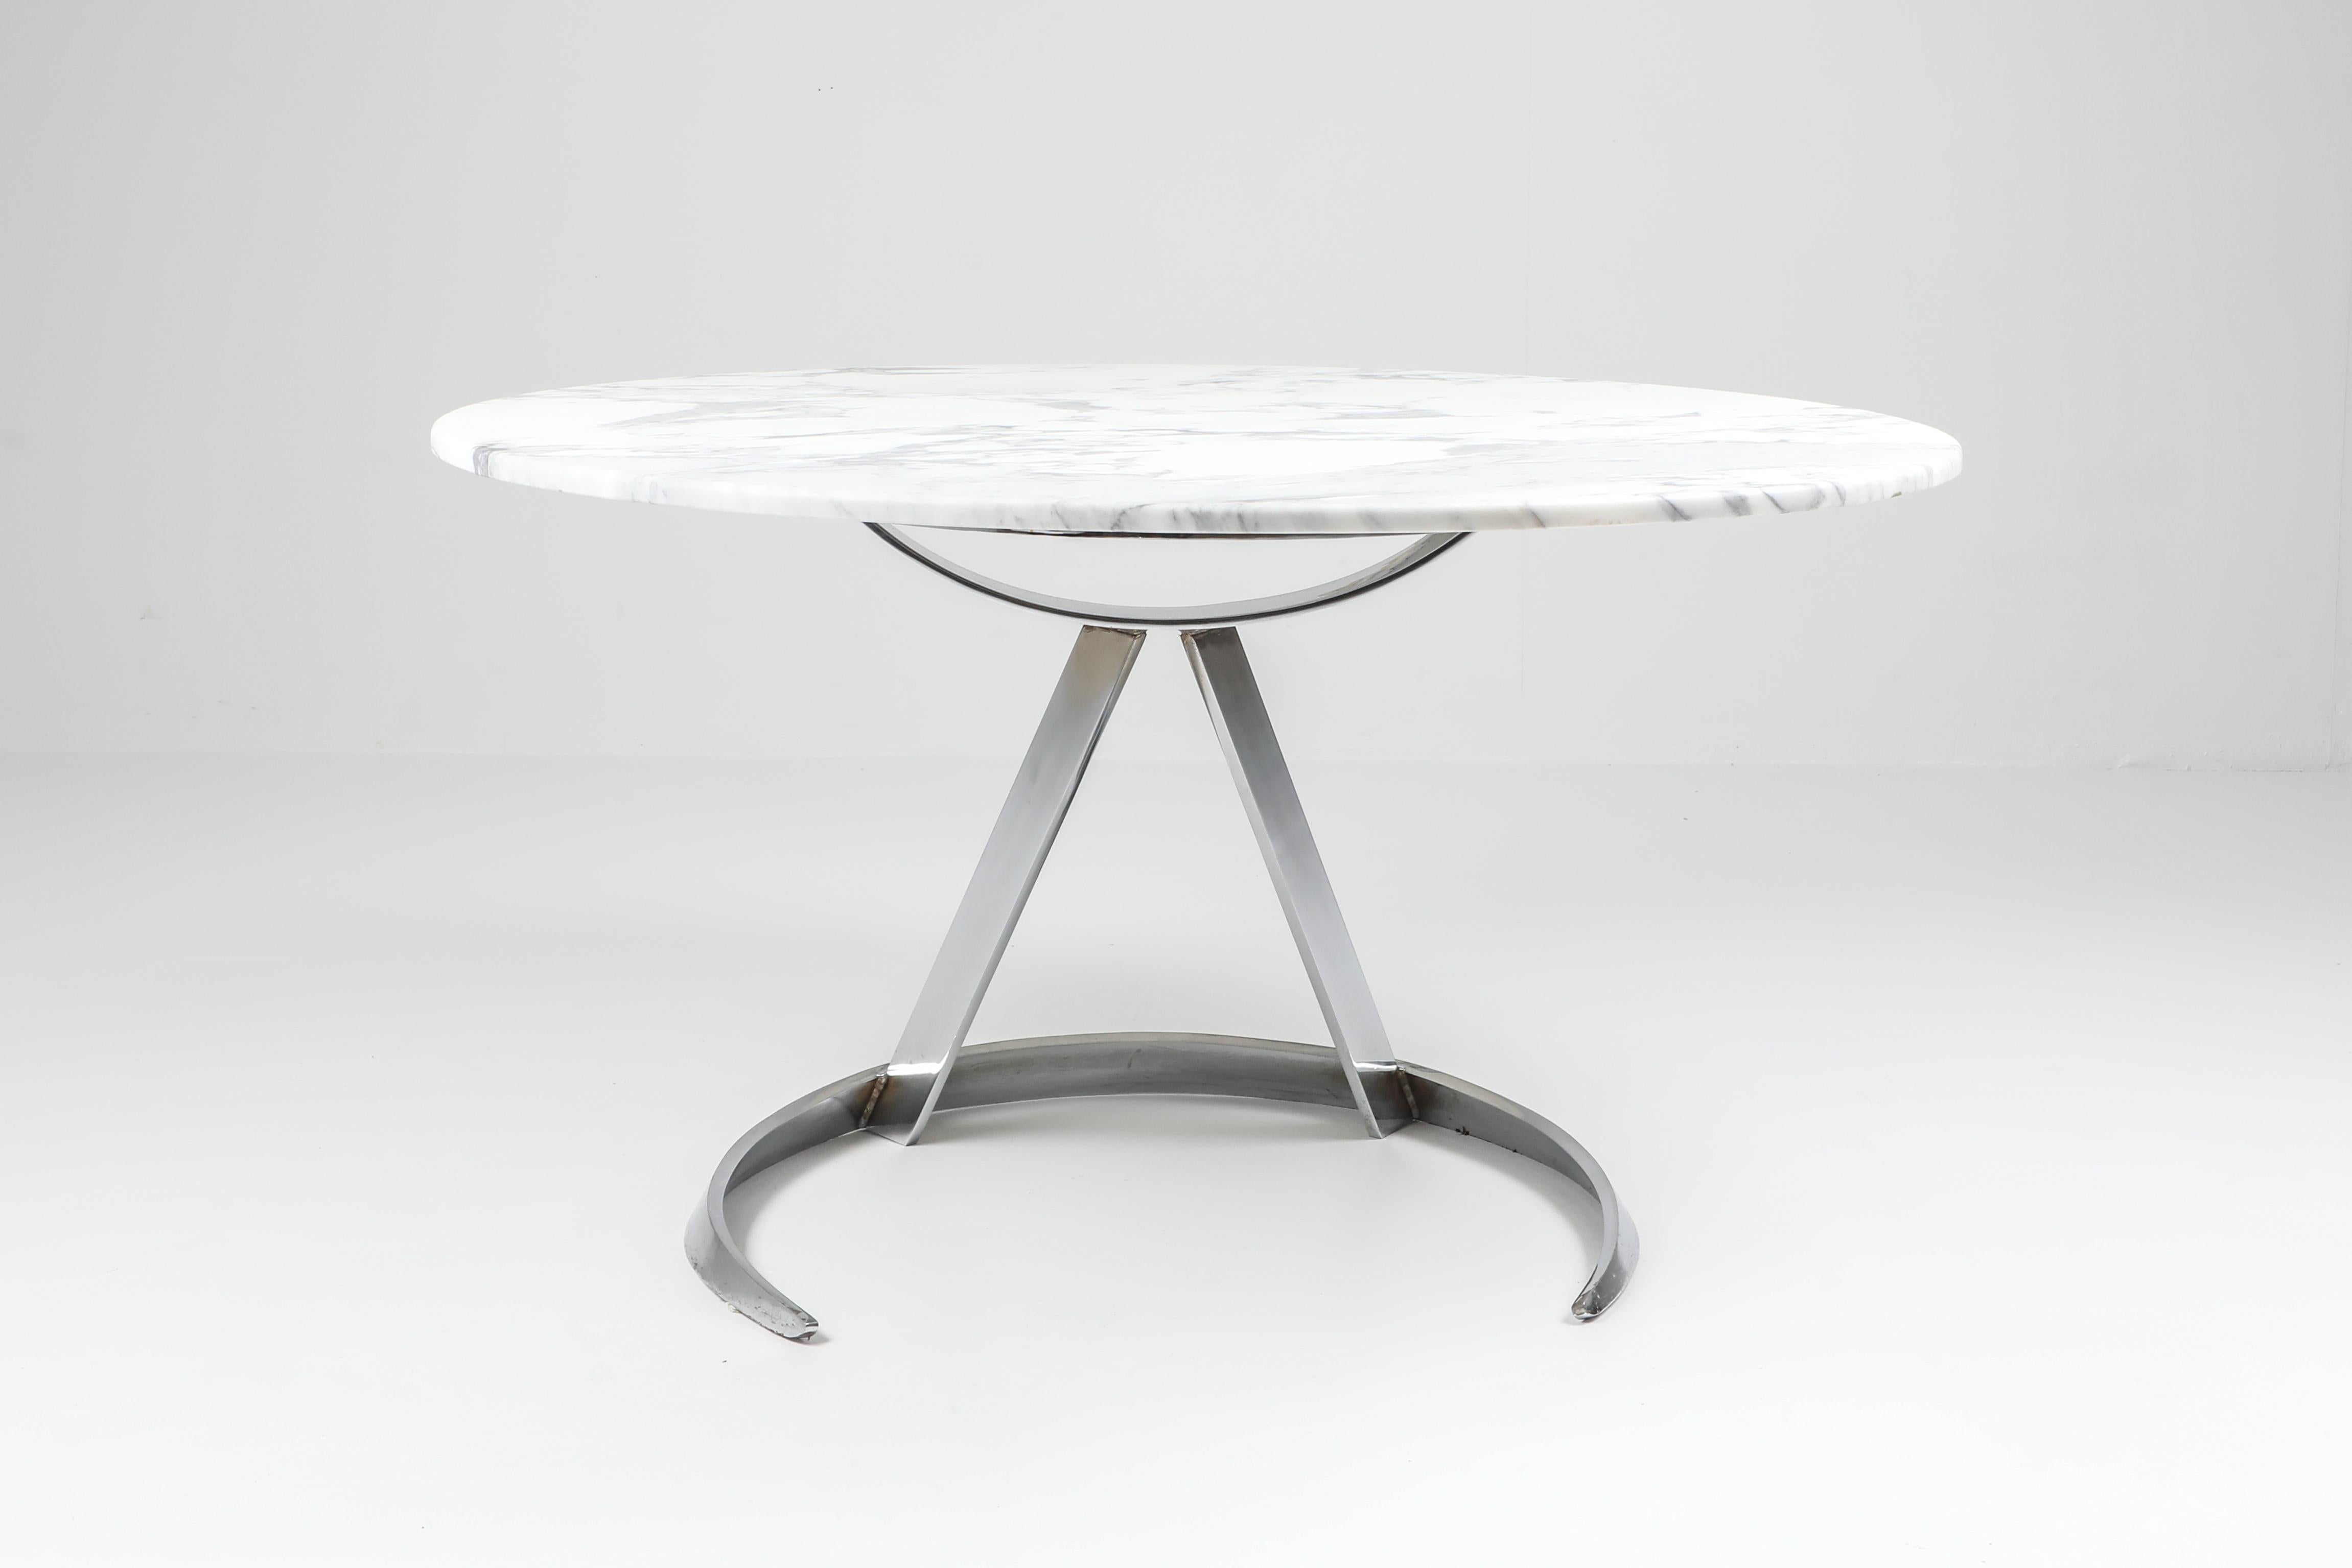 Boris Tabacoff dining table, Mobilier Modulaire Moderne, France, 1960s.

Chromed steel, arabescata marble, Space Age, Postmodern design, set of five
Perfect condition.




